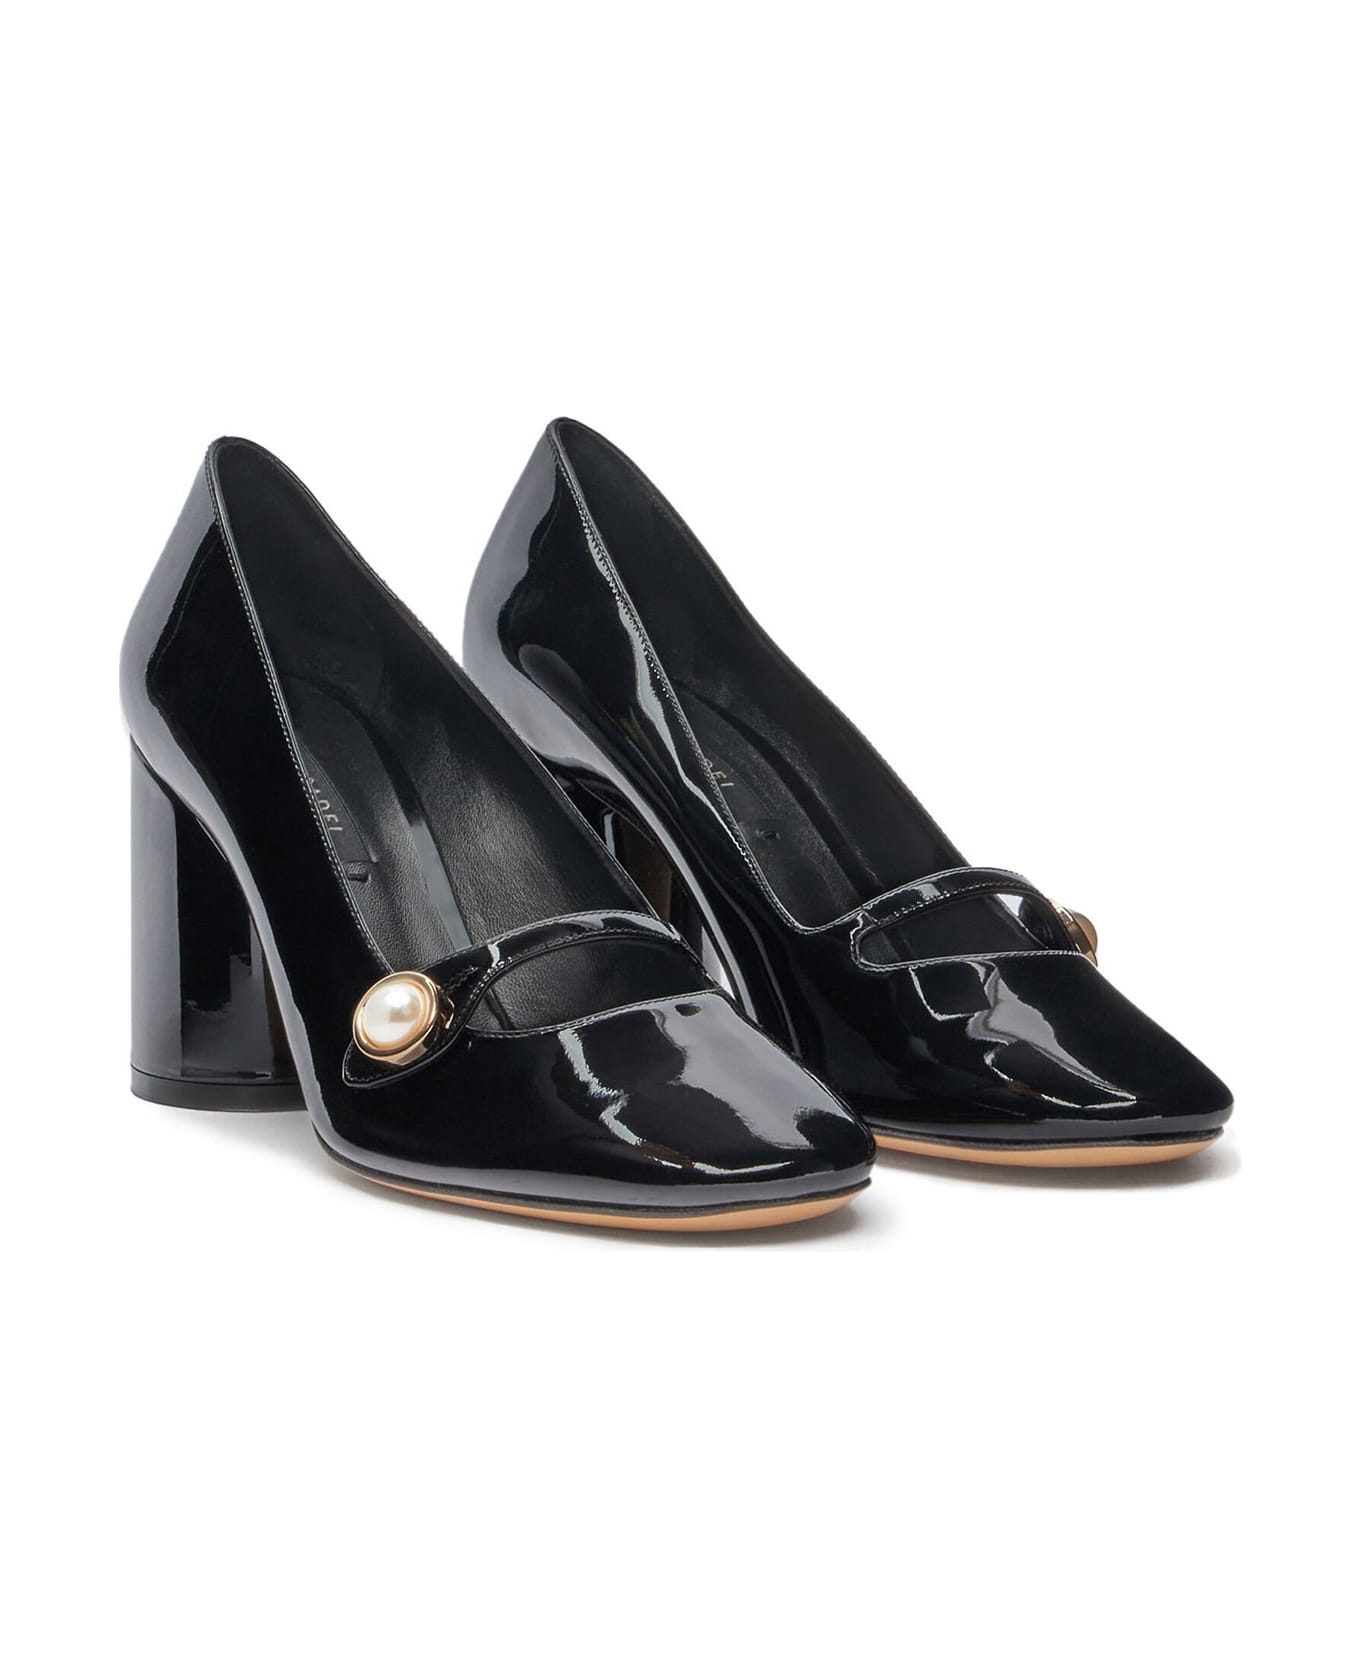 Casadei Mary Jane Emily Pumps In Patent Leather - NERO